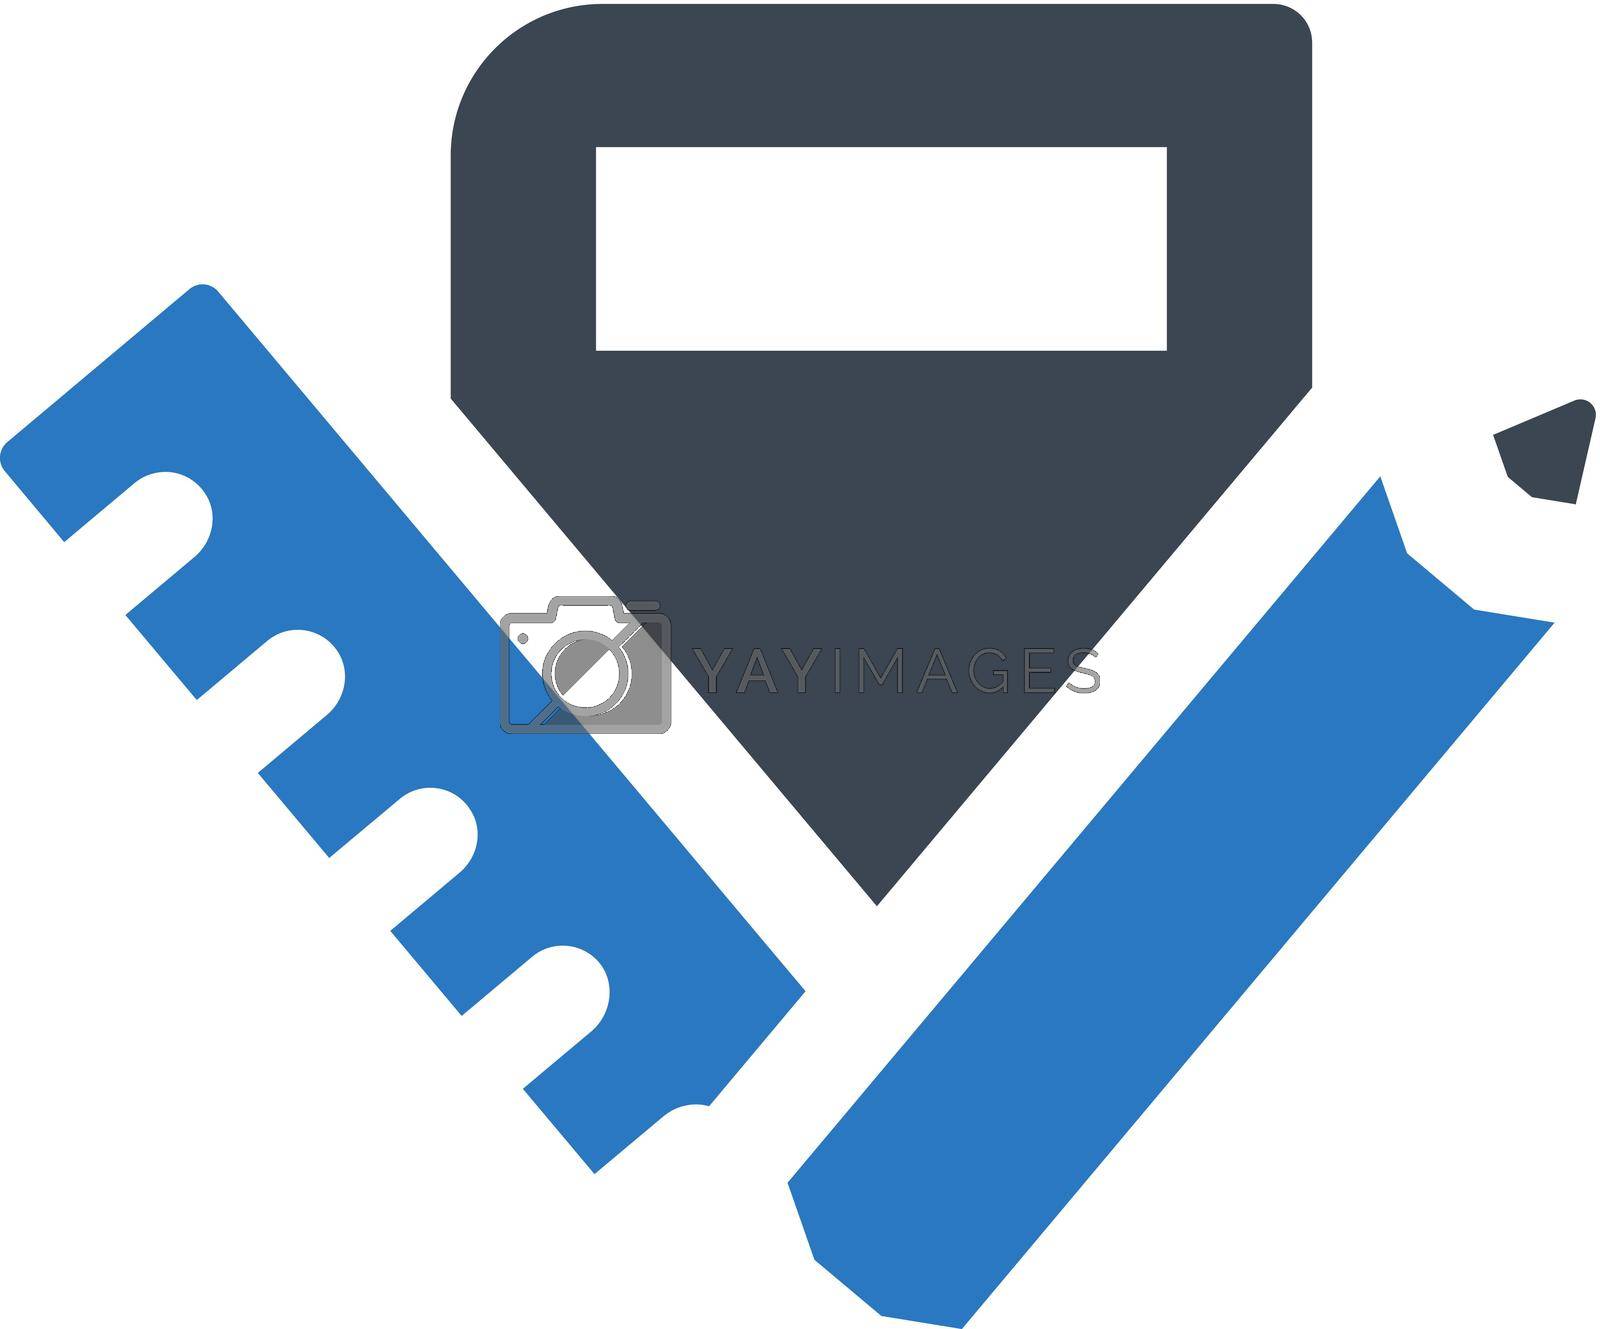 Royalty free image of Education tools icon by delwar018